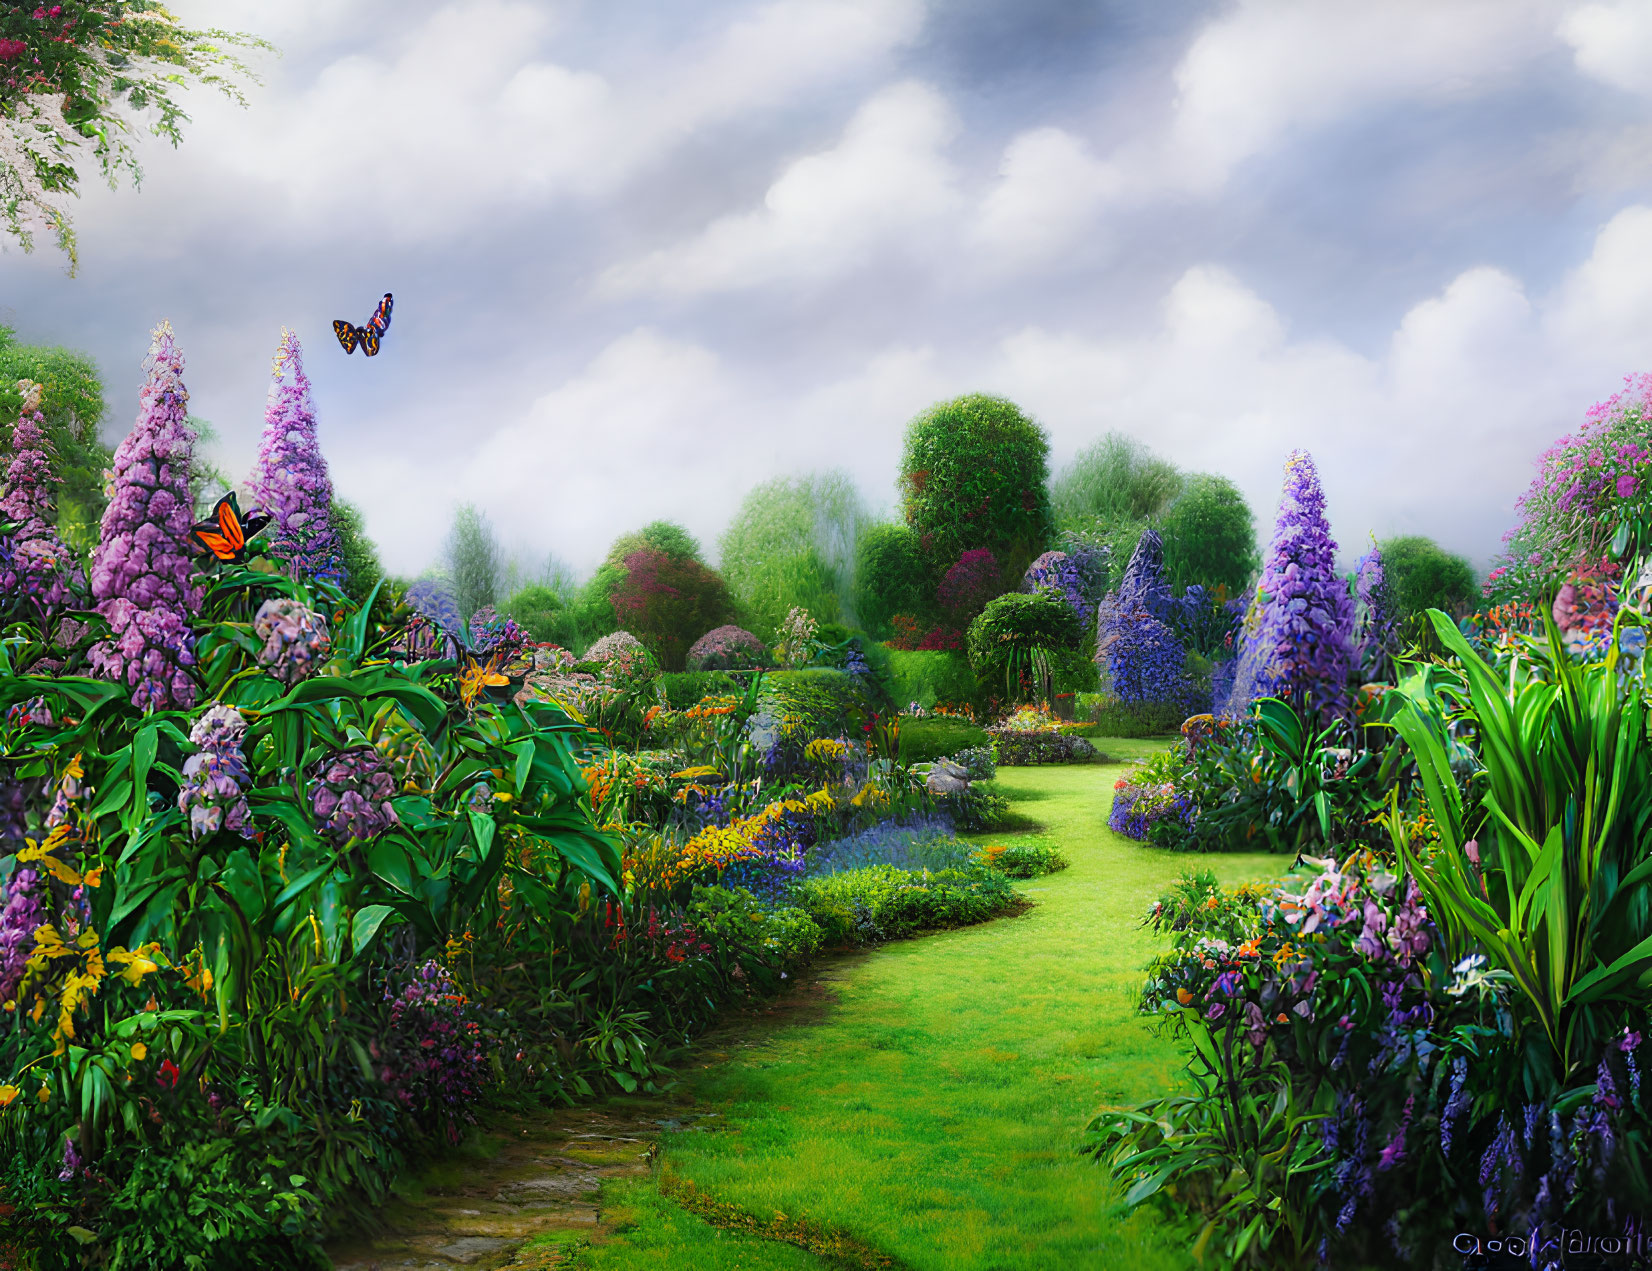 Colorful garden scene with green path, blooming flowers, butterflies, and cloudy sky.